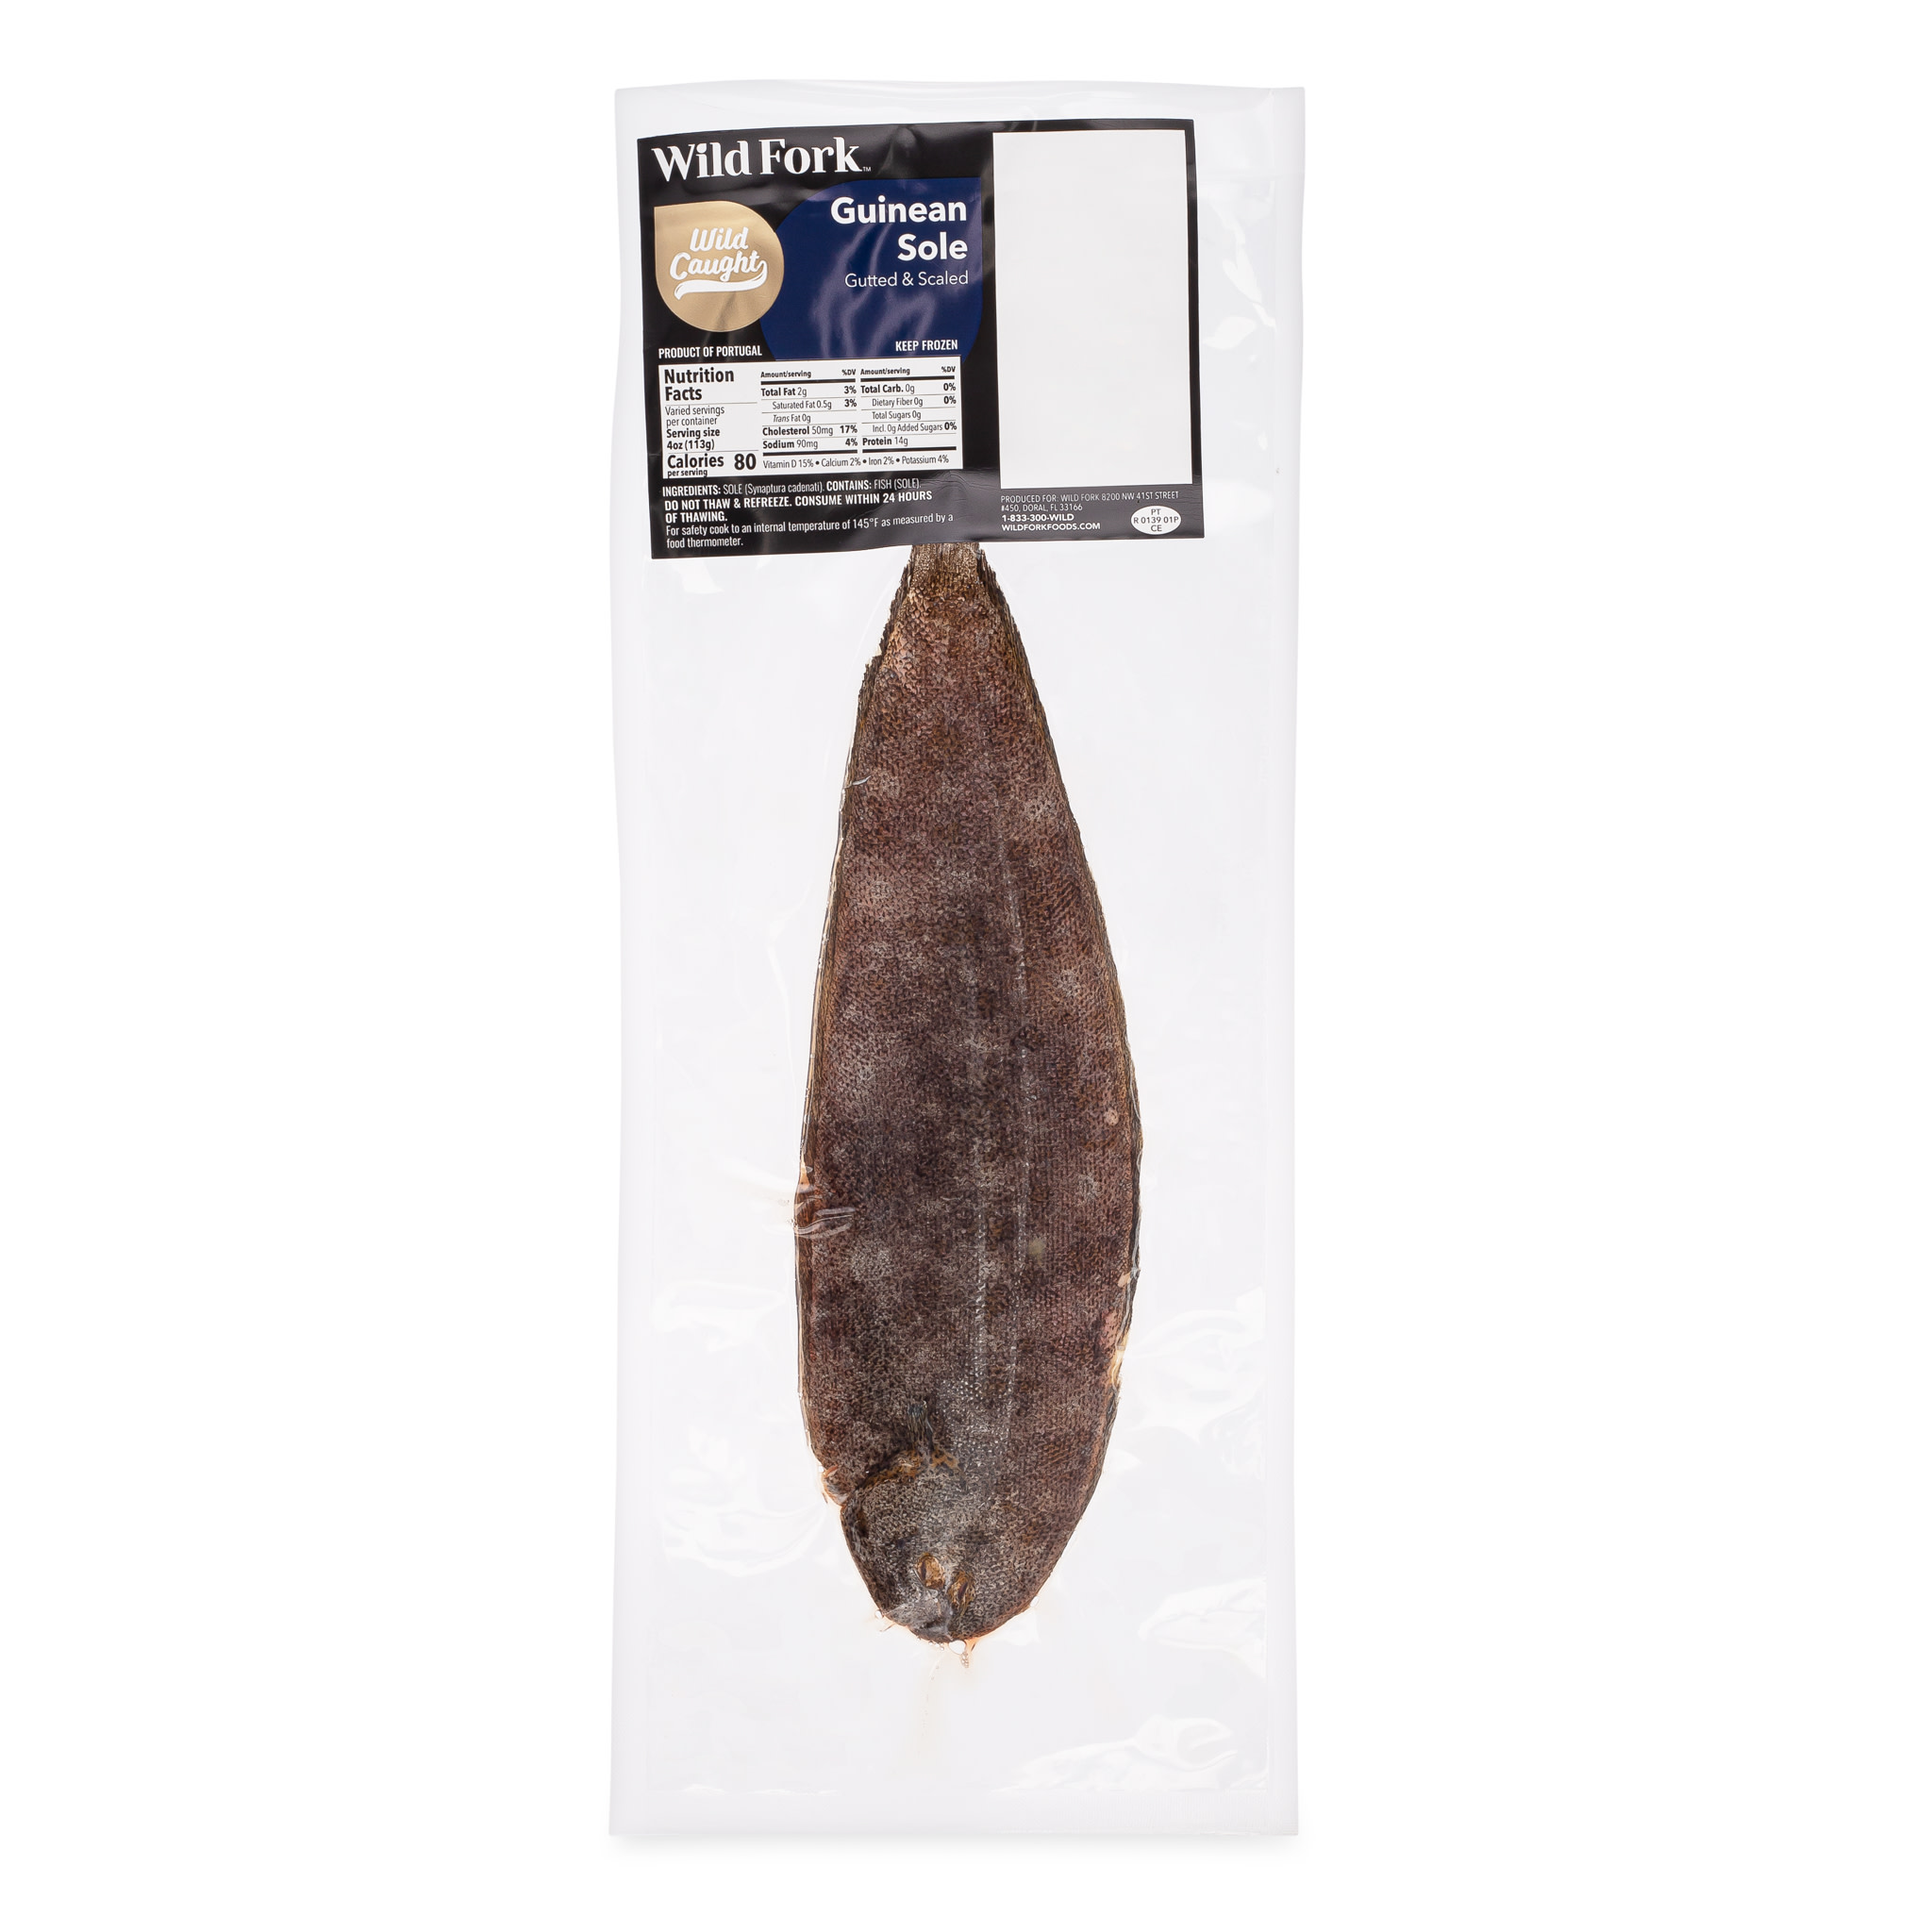 6154 WF PACKAGED Whole Guinean Sole SEAFOOD